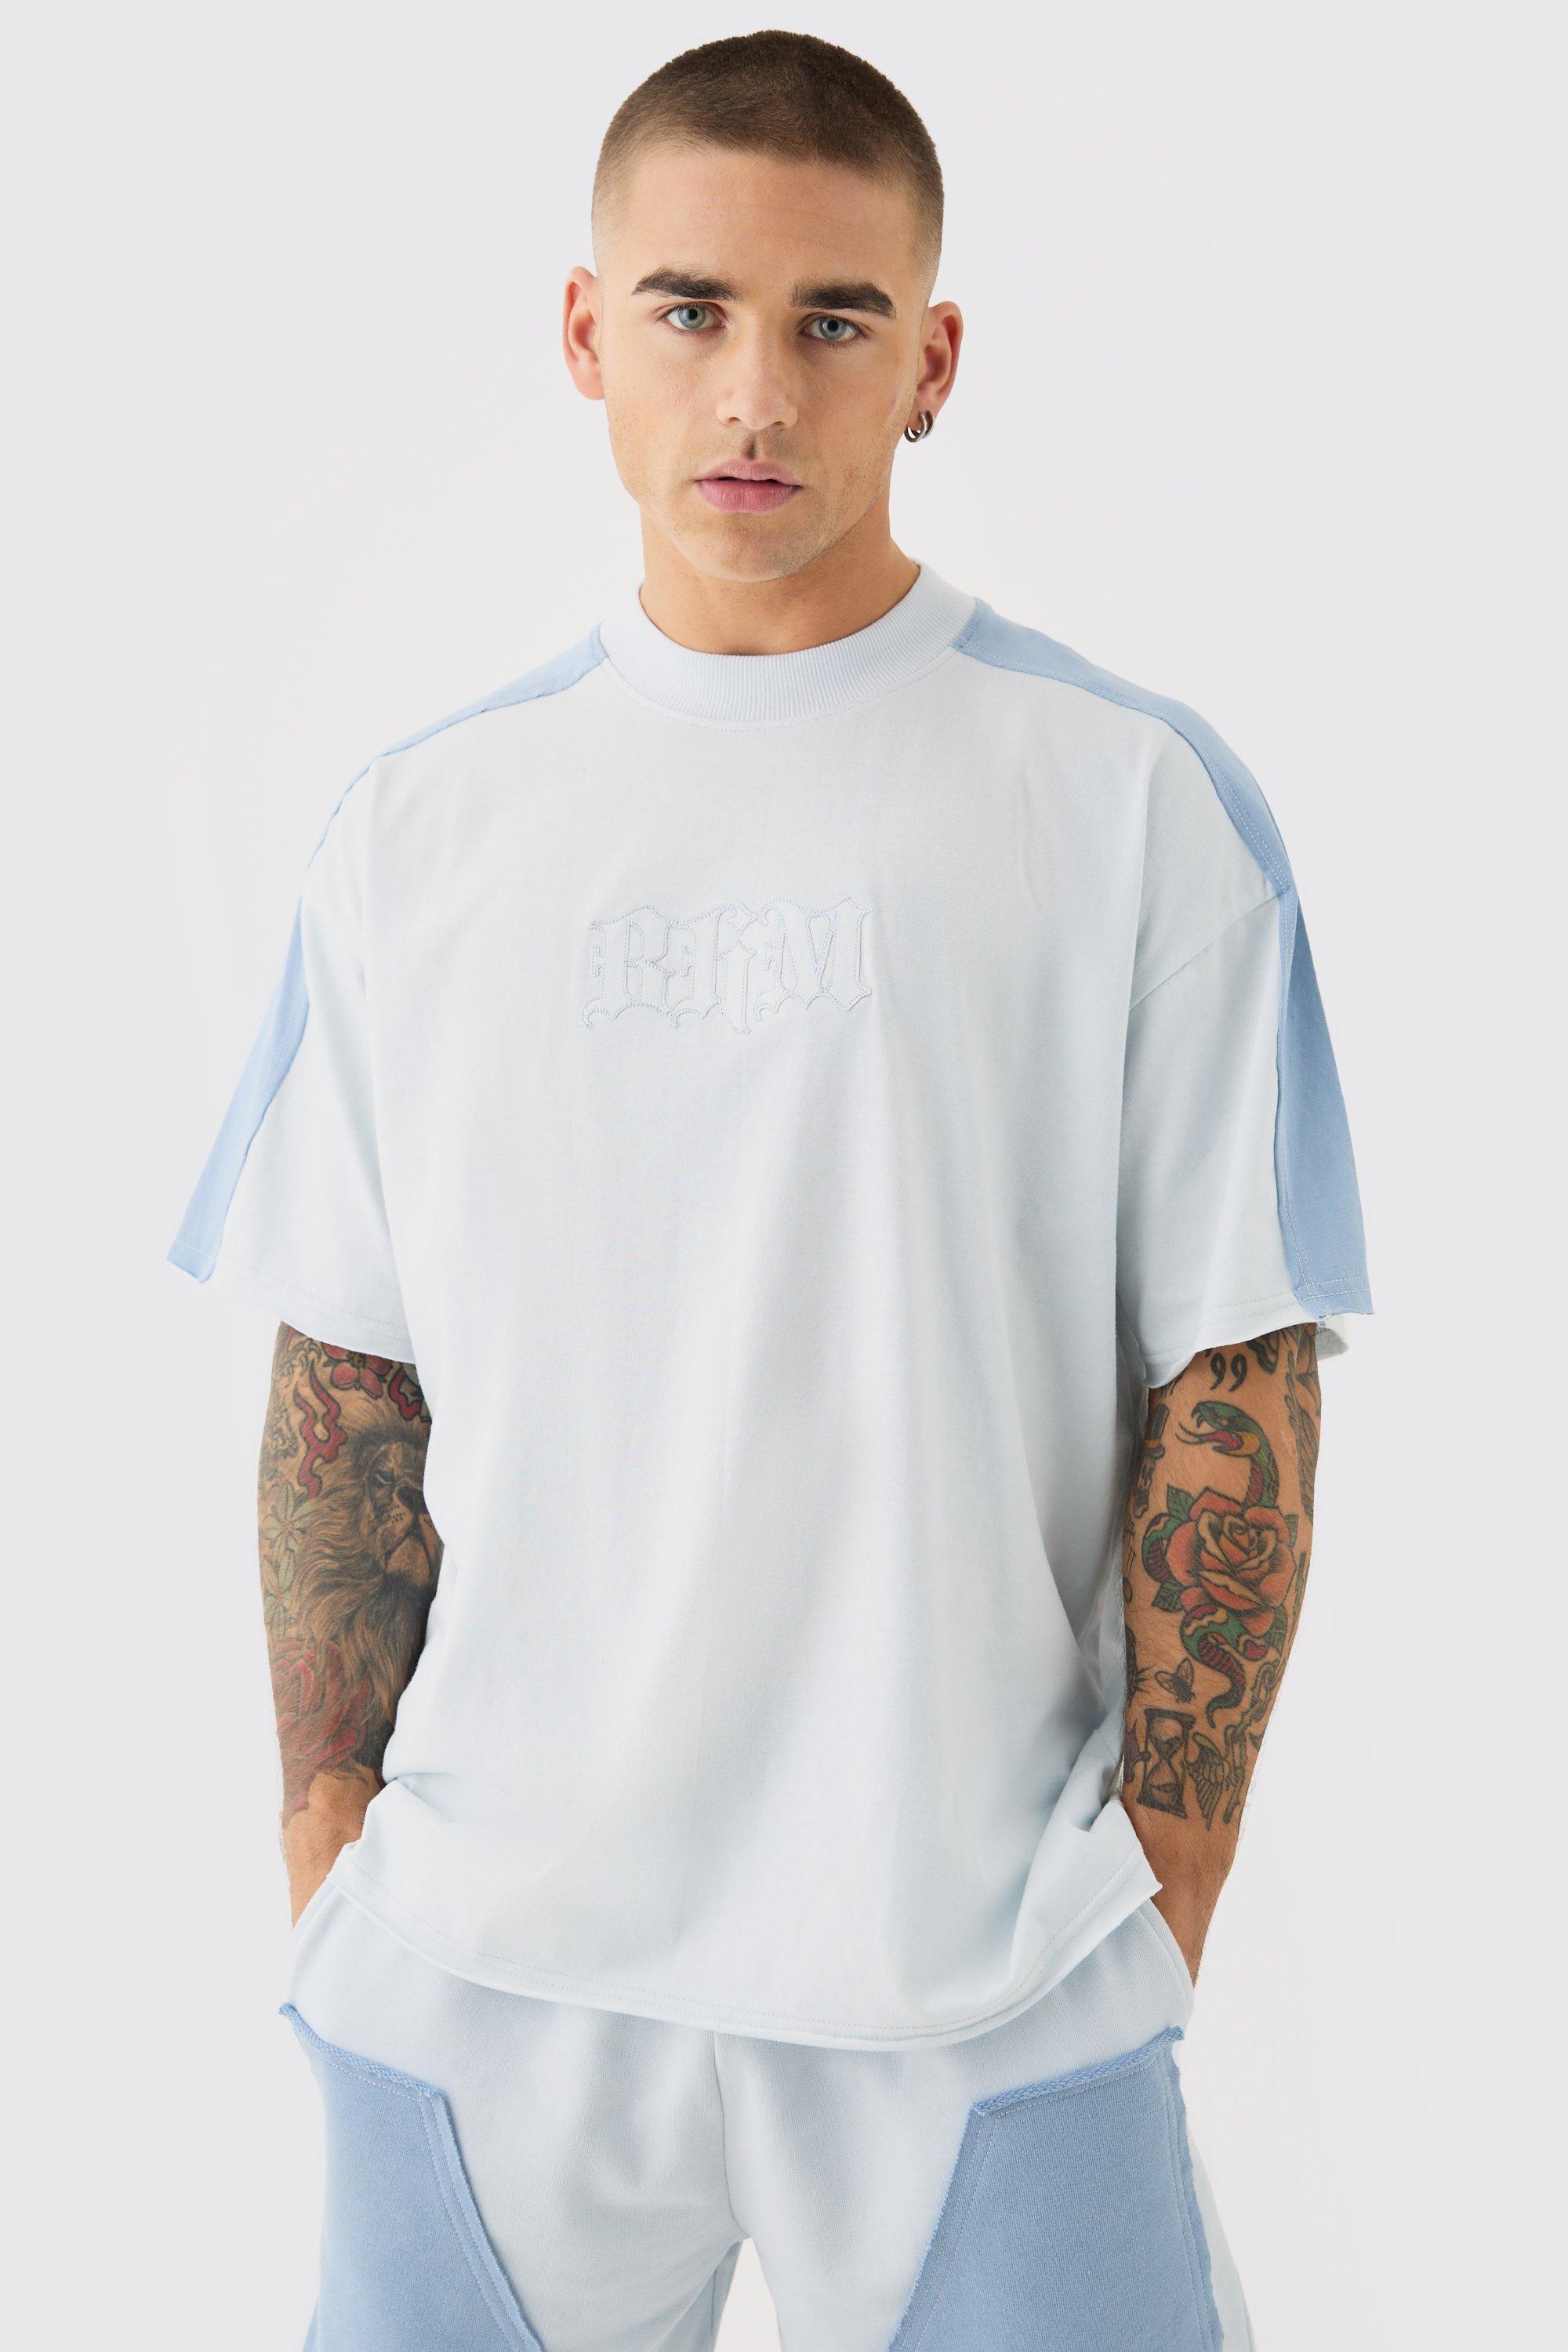 Image of Oversized Gothic Bm Applique Nibbled T-shirt, Azzurro